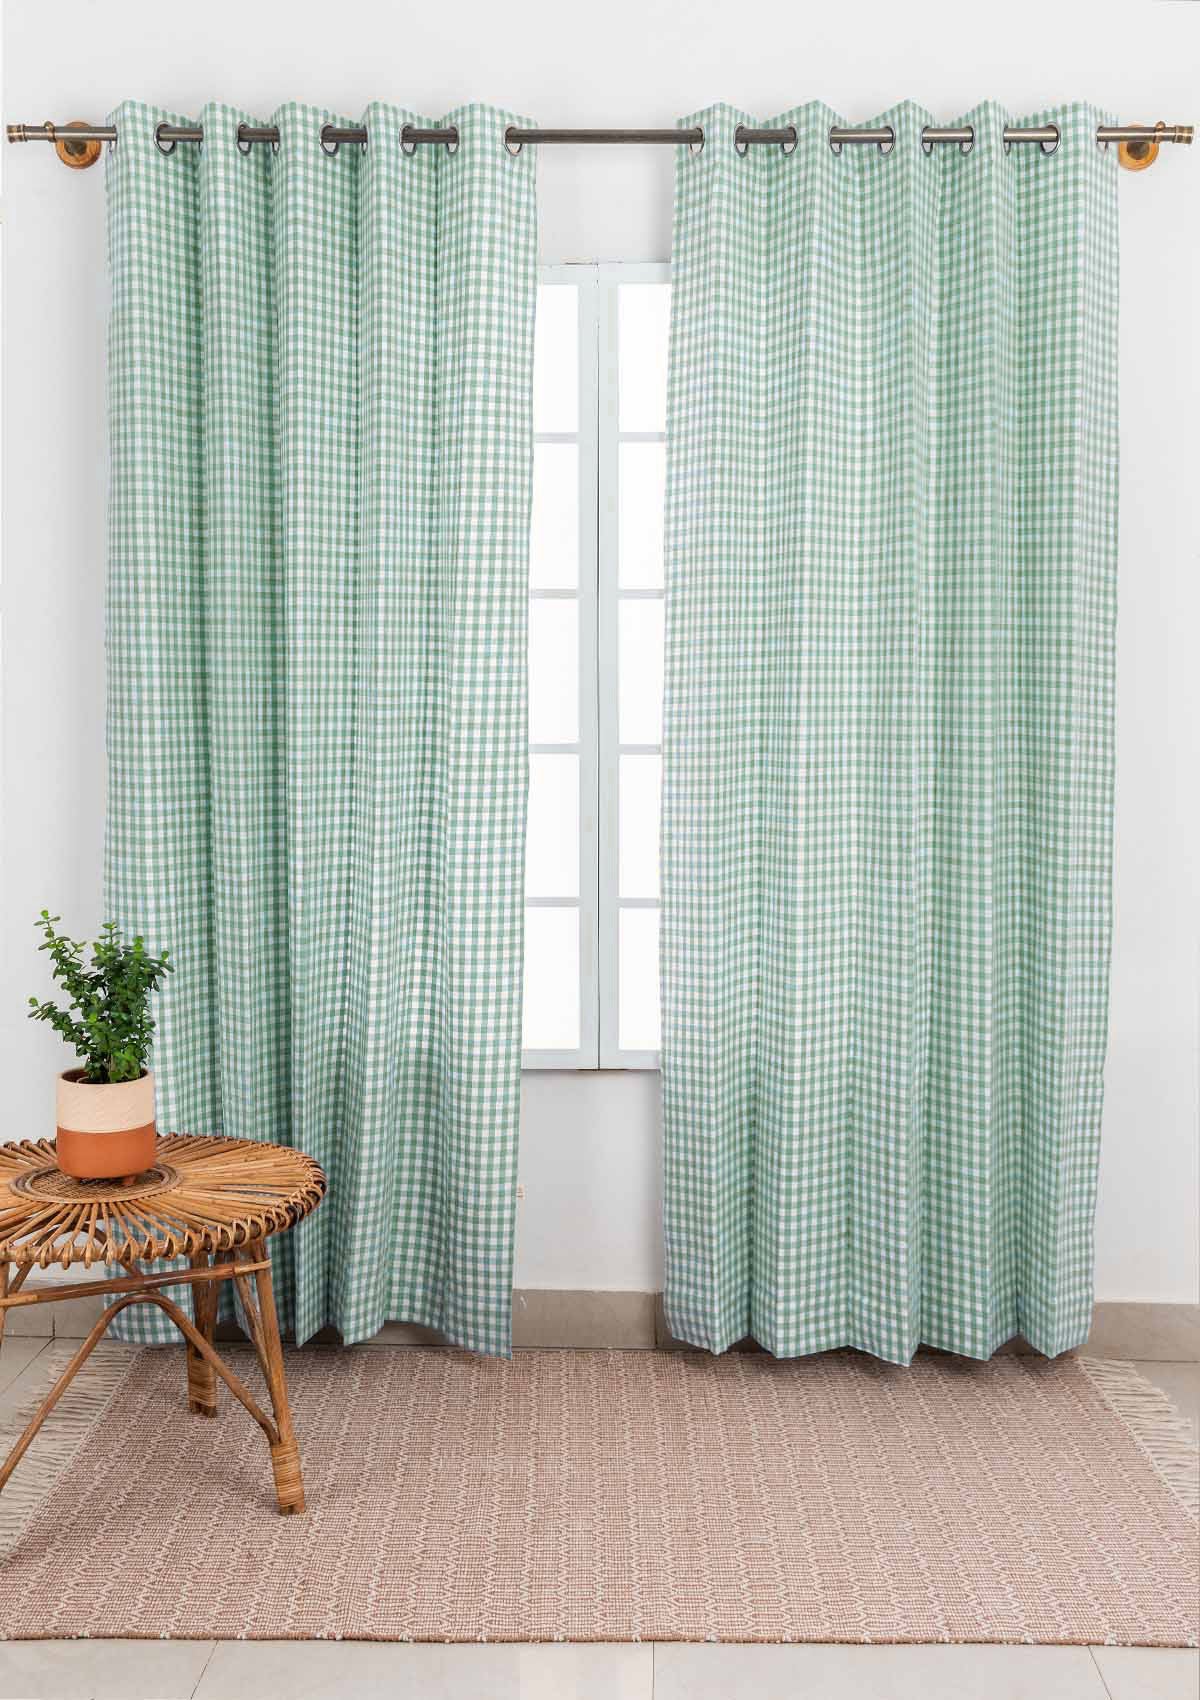 Gingham Woven 100% cotton geometric curtain for living room - Room darkening - Sage Green - Pack of 1